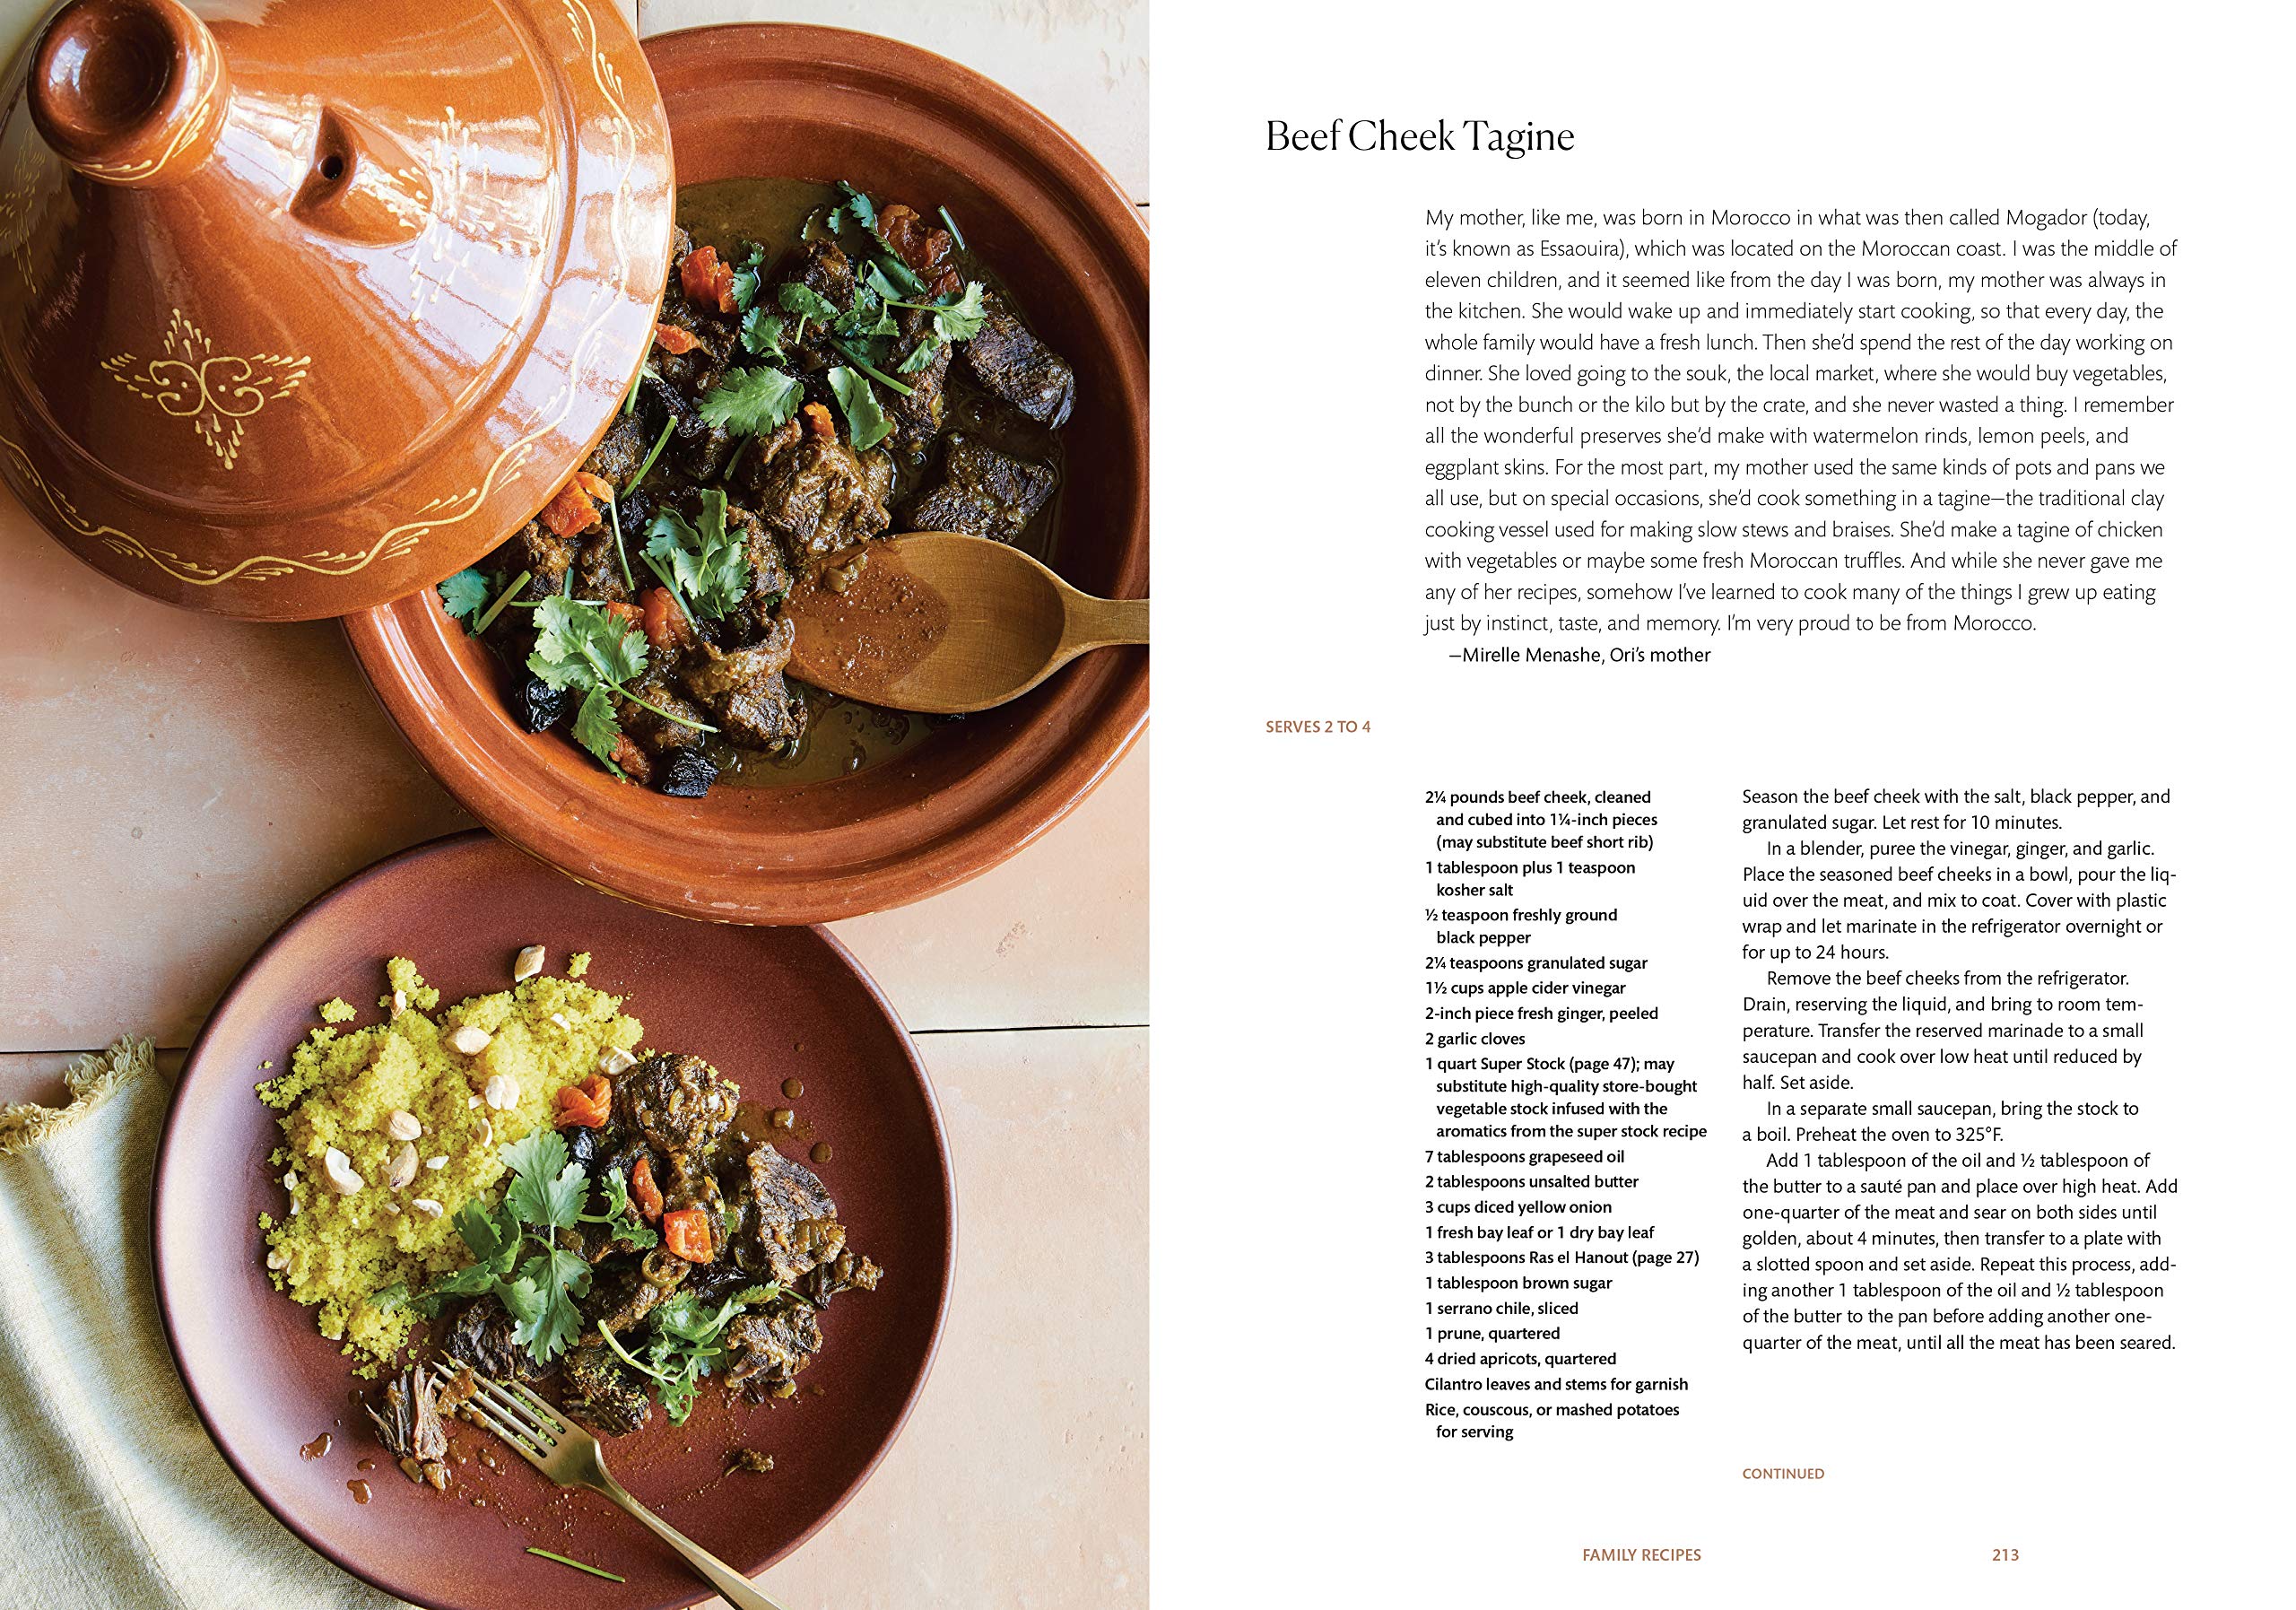 Bavel: Modern Recipes Inspired by the Middle East (Ori Menashe, Genevieve Gergis)